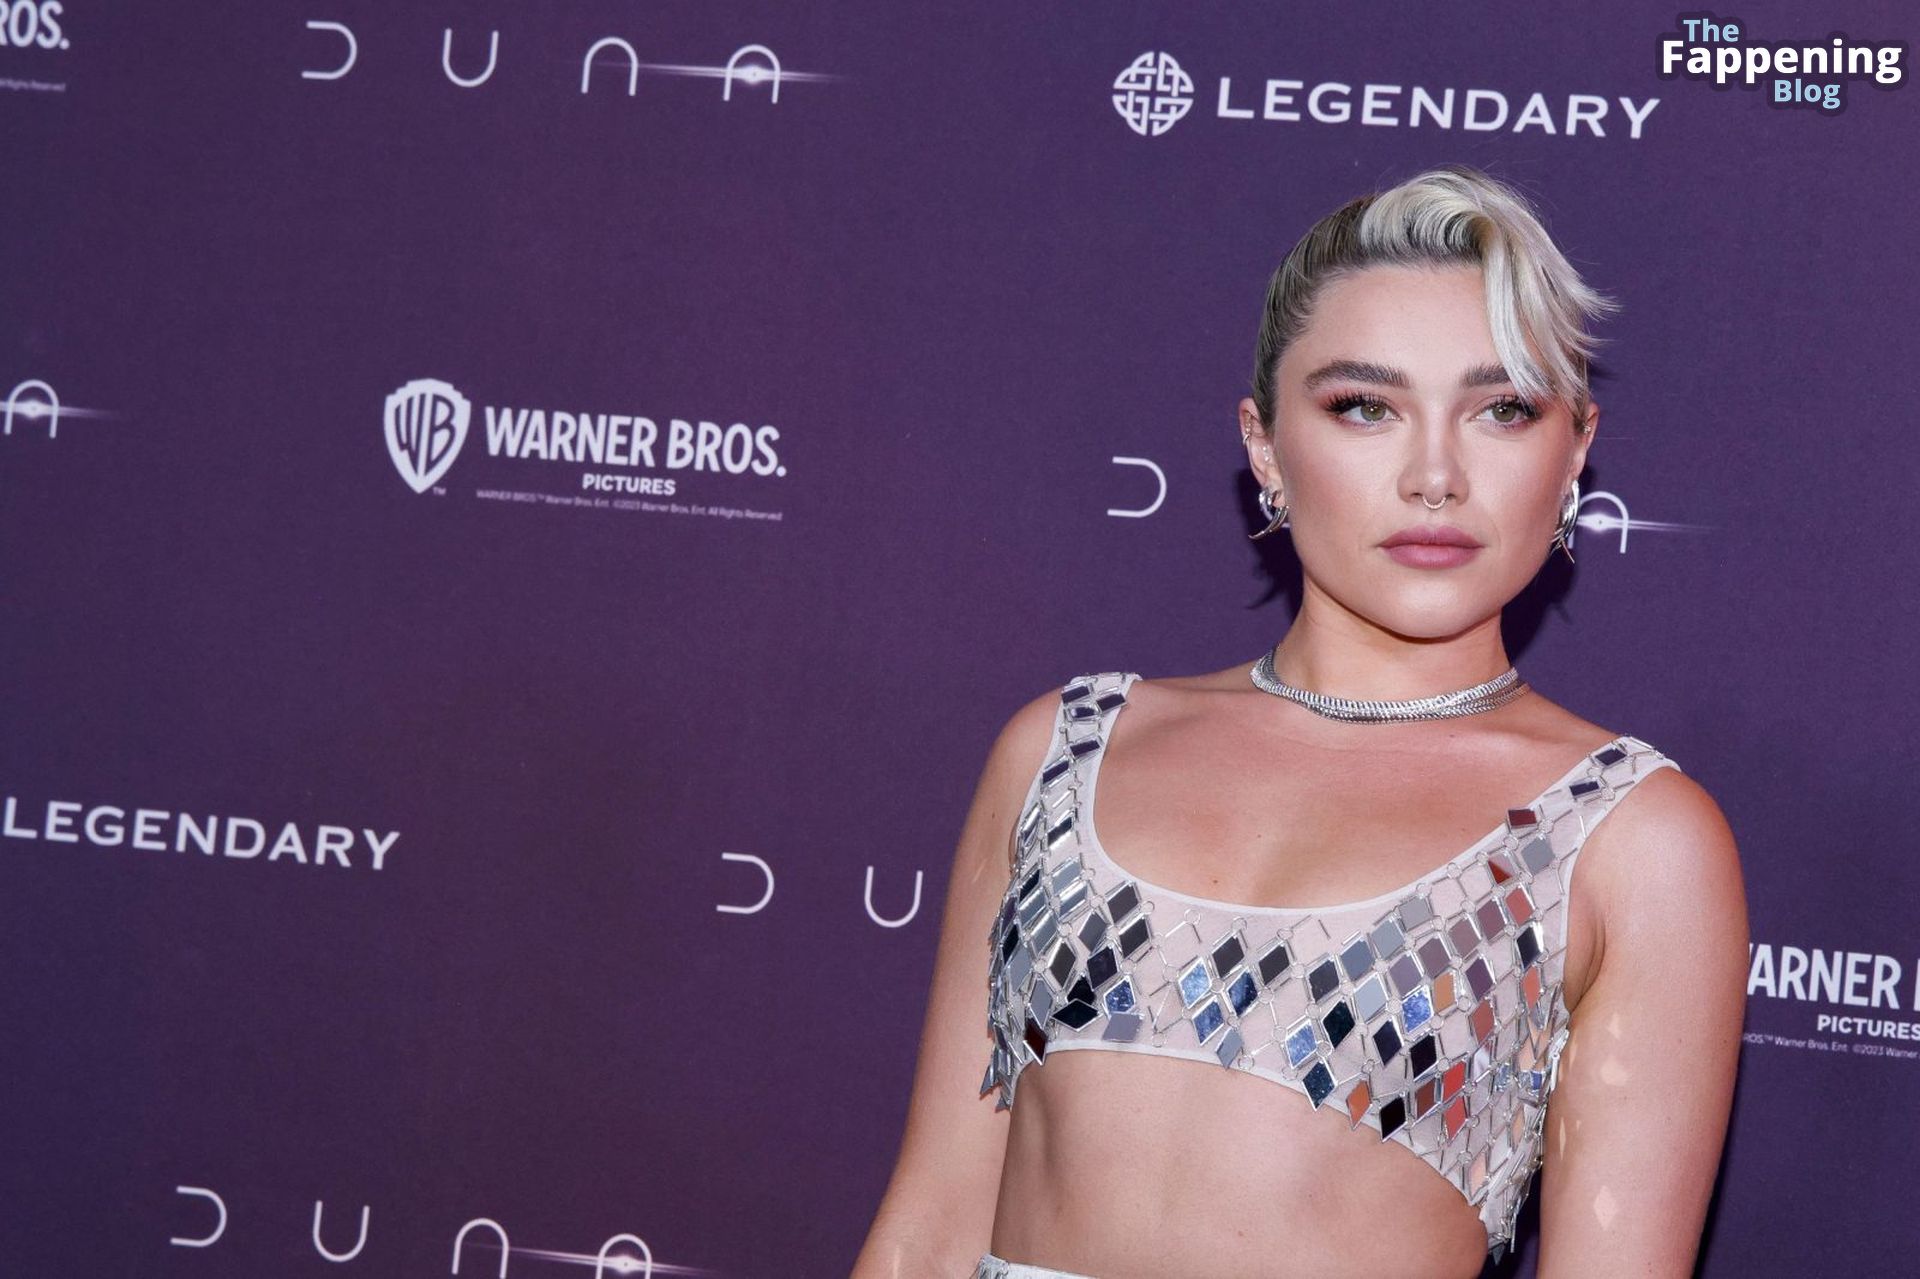 Florence-Pugh-Sexy-89-The-Fappening-Blog.jpg